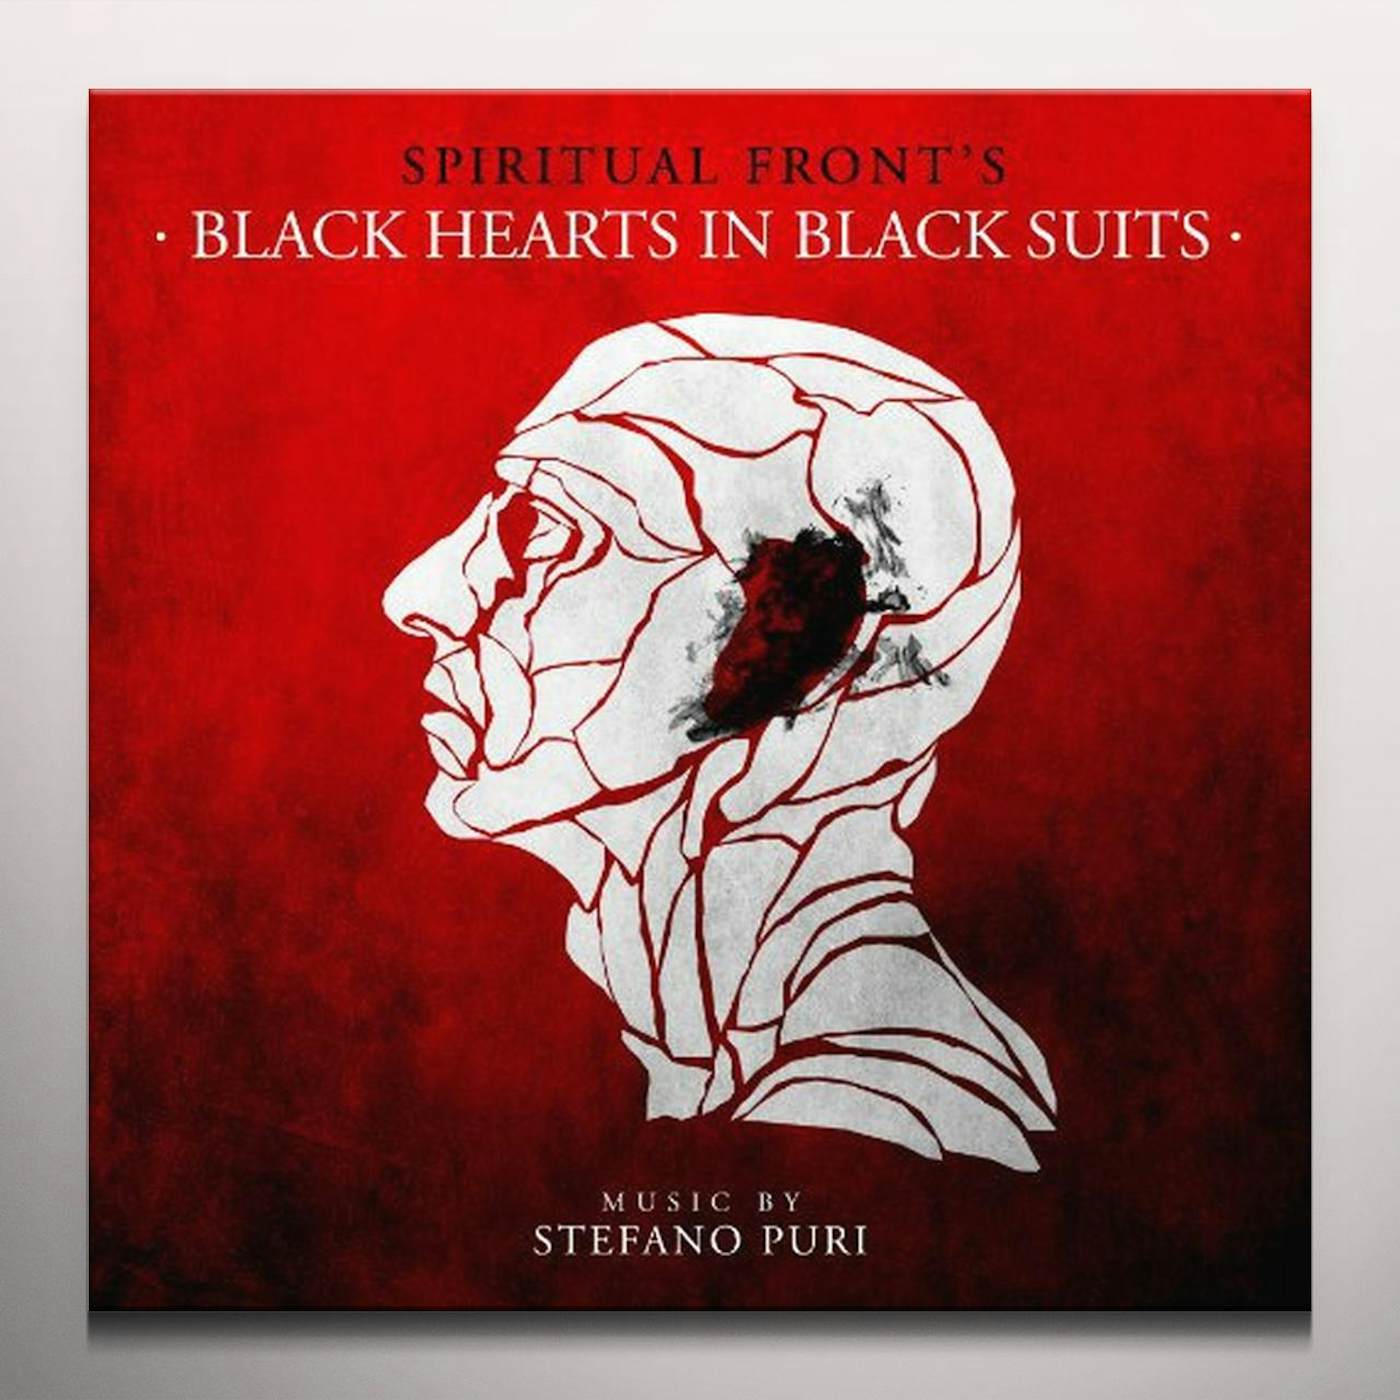 Spiritual Front BLACK HEARTS IN BLACK SUITS Vinyl Record - Limited Edition, Colored Vinyl